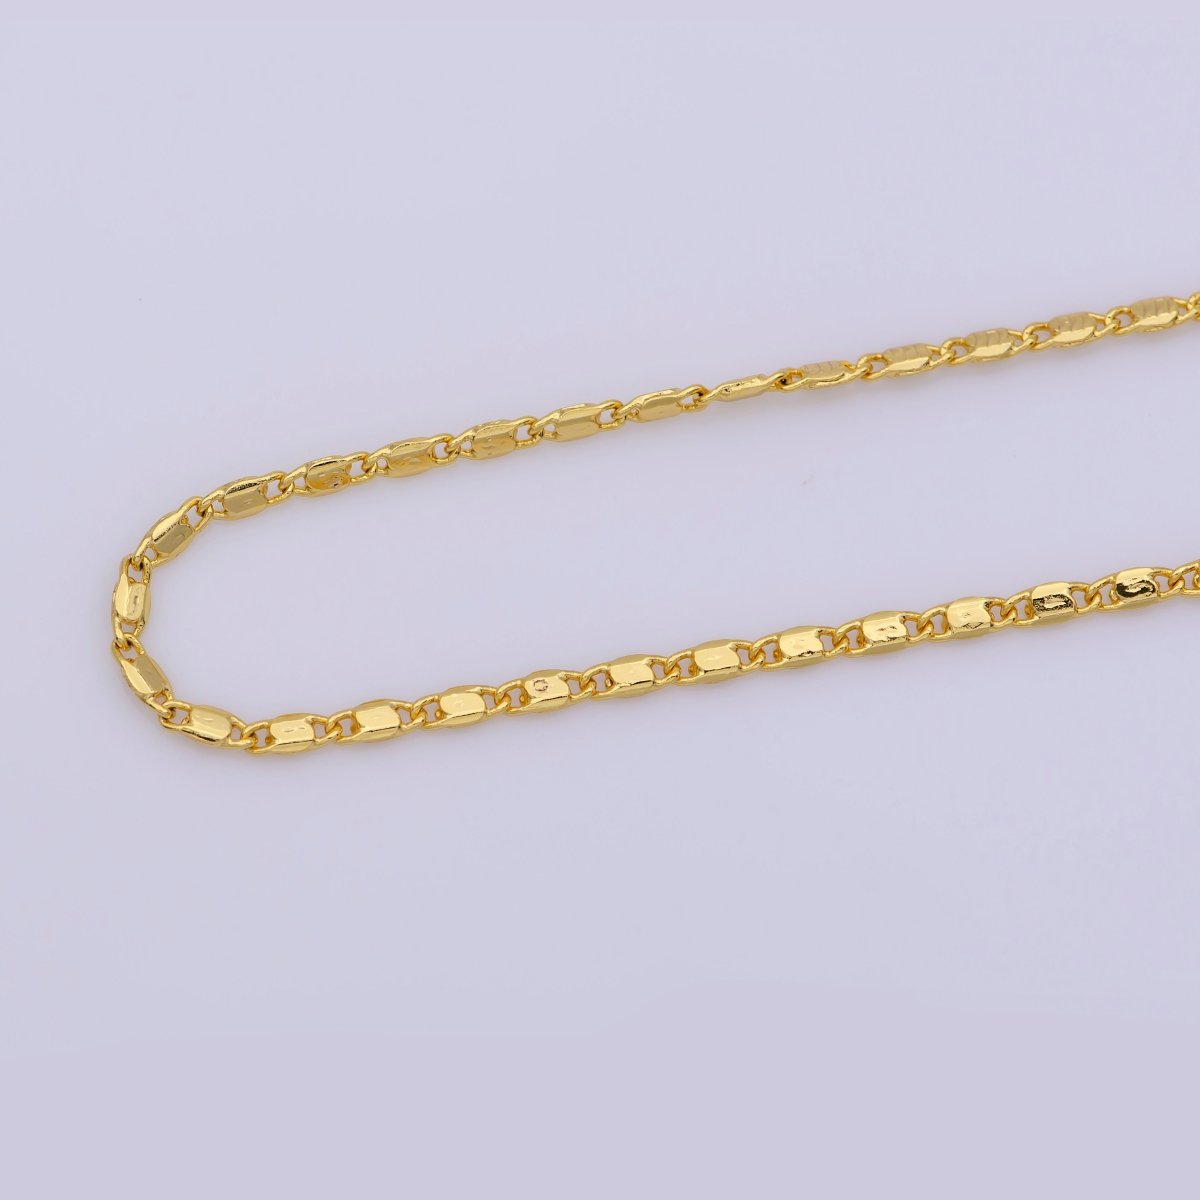 17 inch Scroll Necklace, 24K Gold Plated Finished Chain For Jewelry Making, Dainty 2mm Unique Necklace w/ Spring Ring | CN-332 Clearance Pricing - DLUXCA